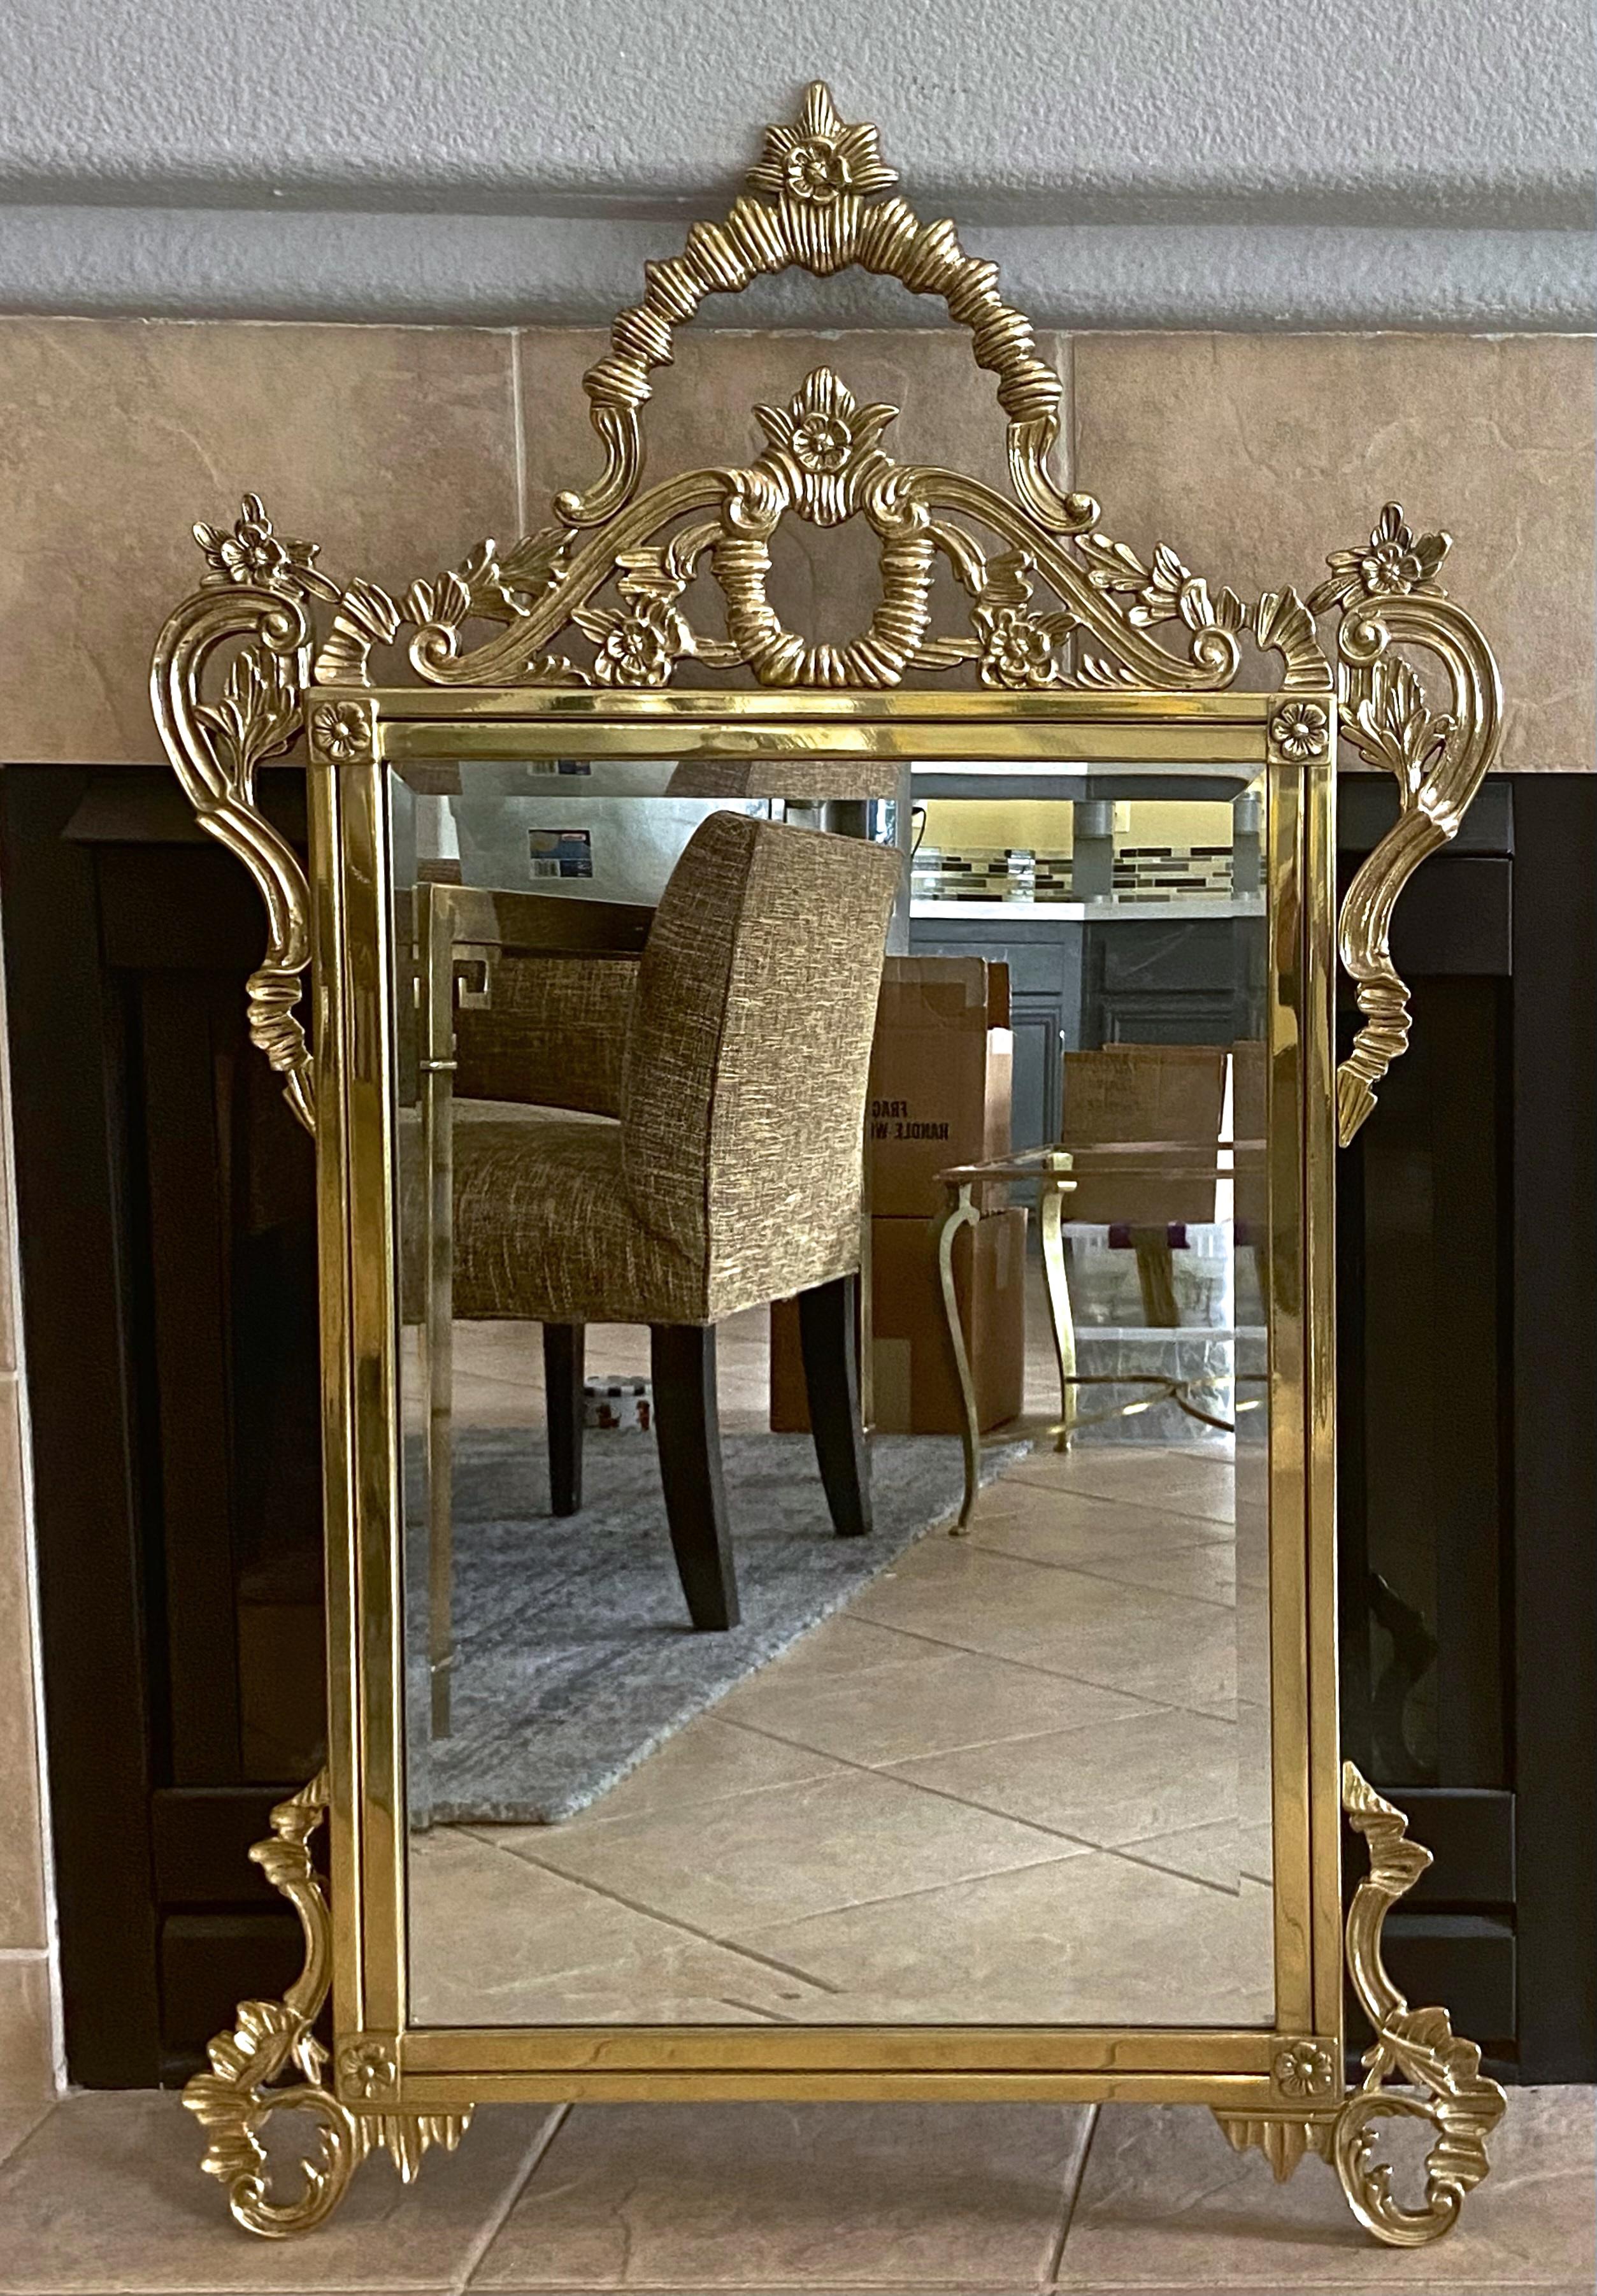 Solid brass French Rococo style beveled wall mirror. The brass is expertly casted retaining its original lacquered finish, in great condition free of oxidation or tarnish. Made in Europe possibly France late 40's.